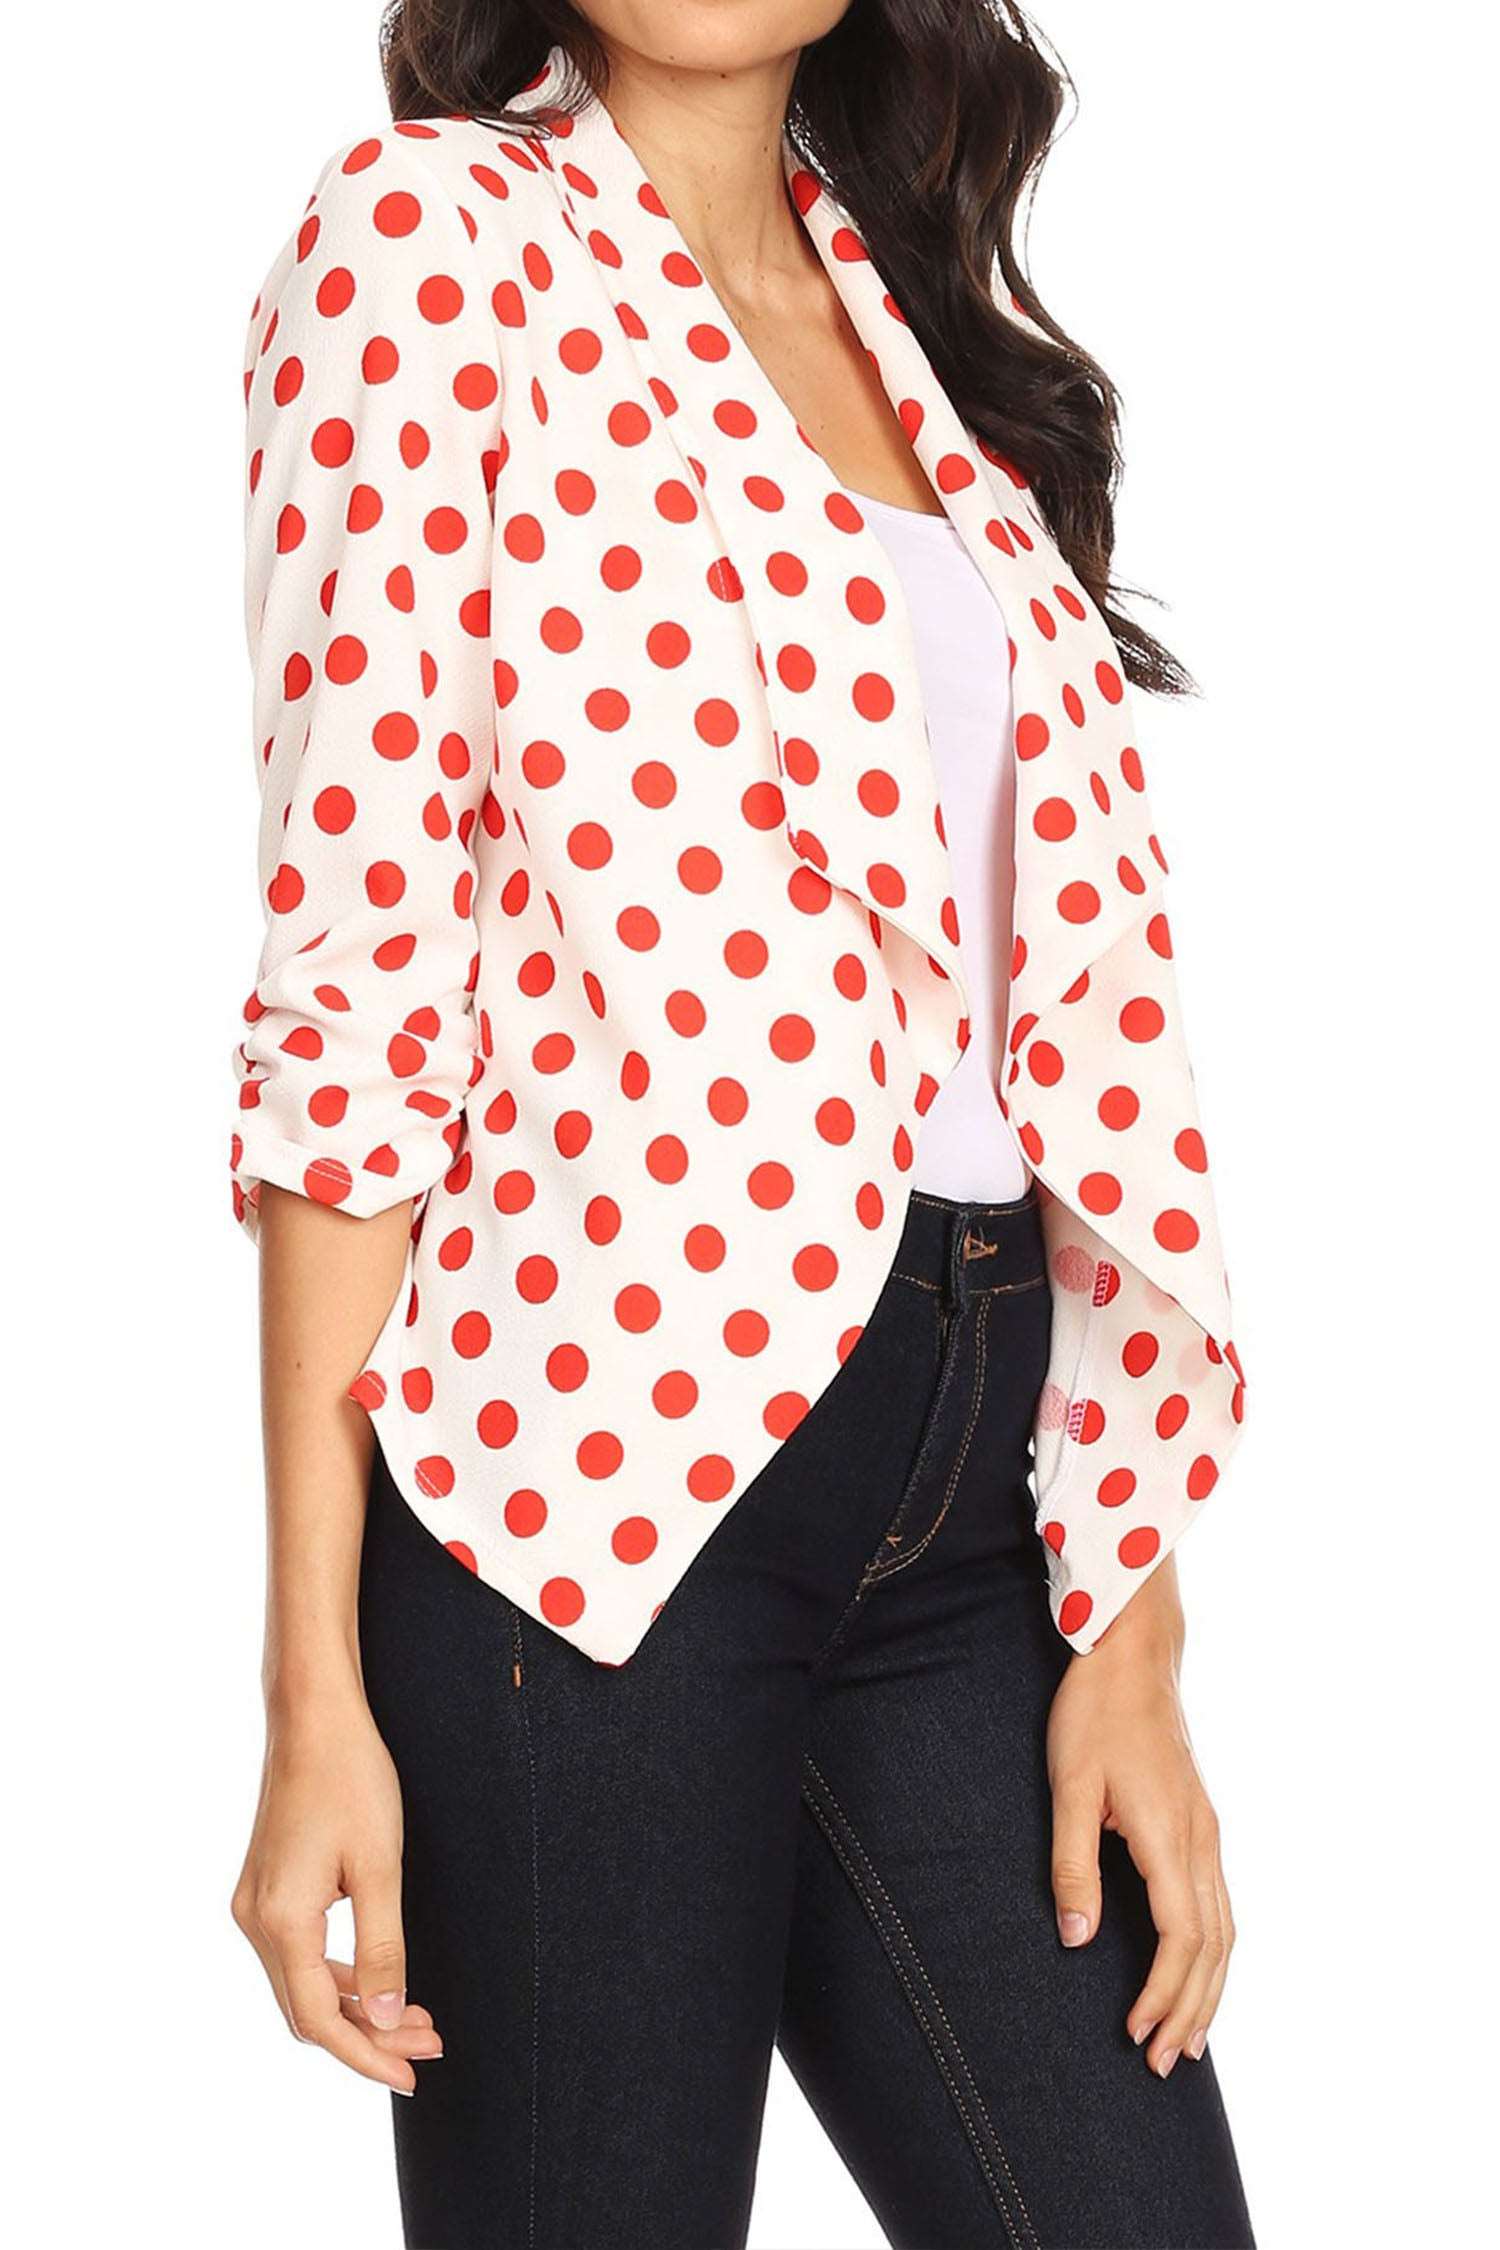 Women's Casual Open Front Polka Dot Roll Up Sleeve Blazer Jacket Made in USA